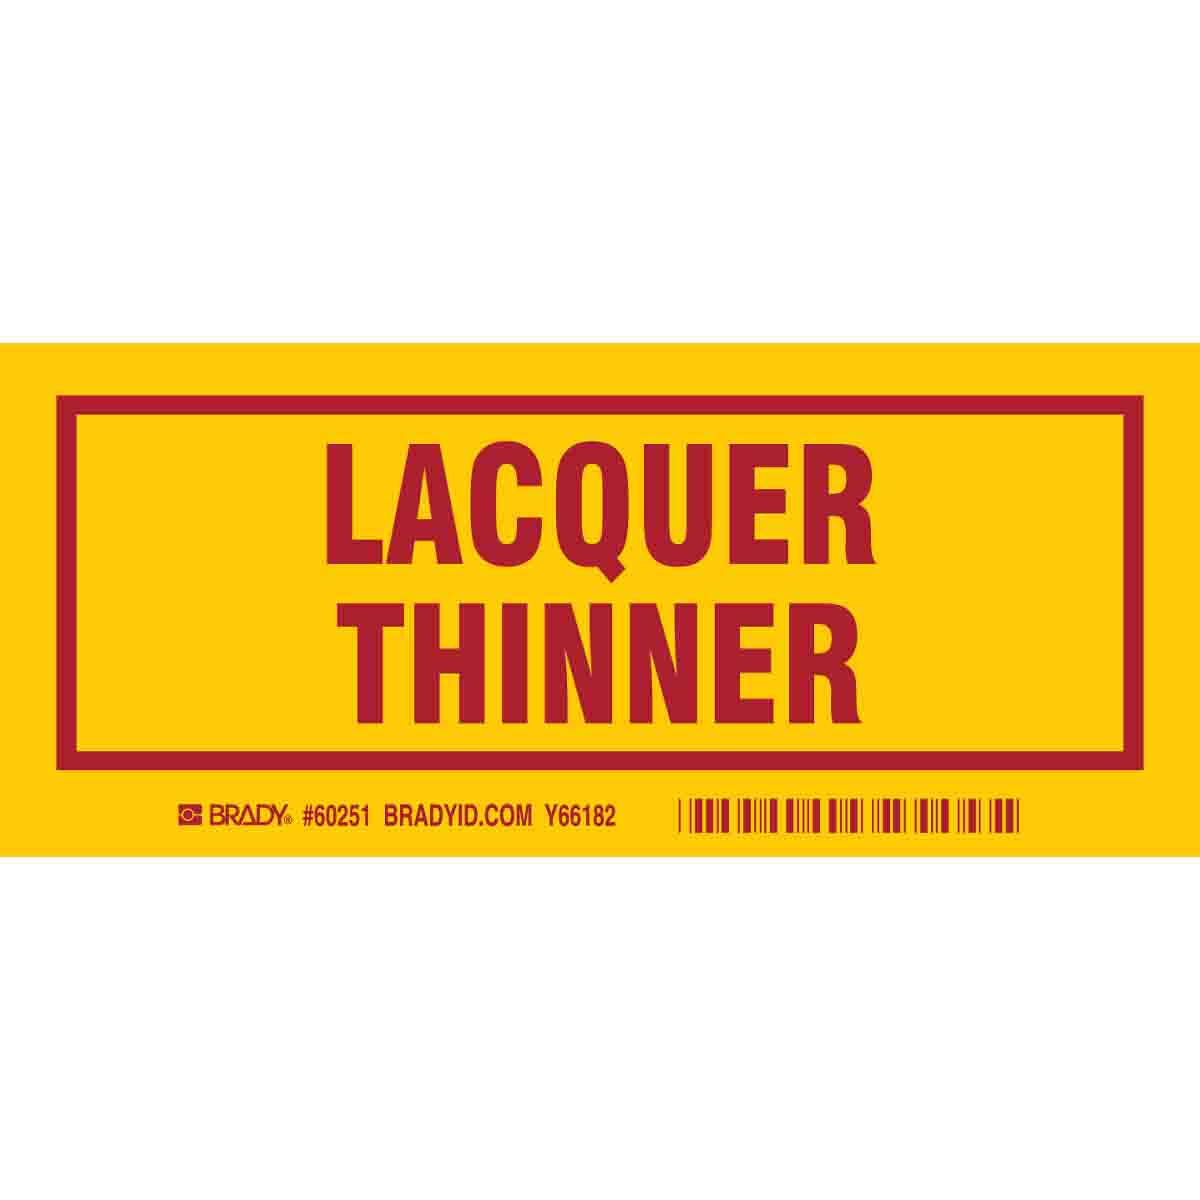 Lacquer Thinner Sign